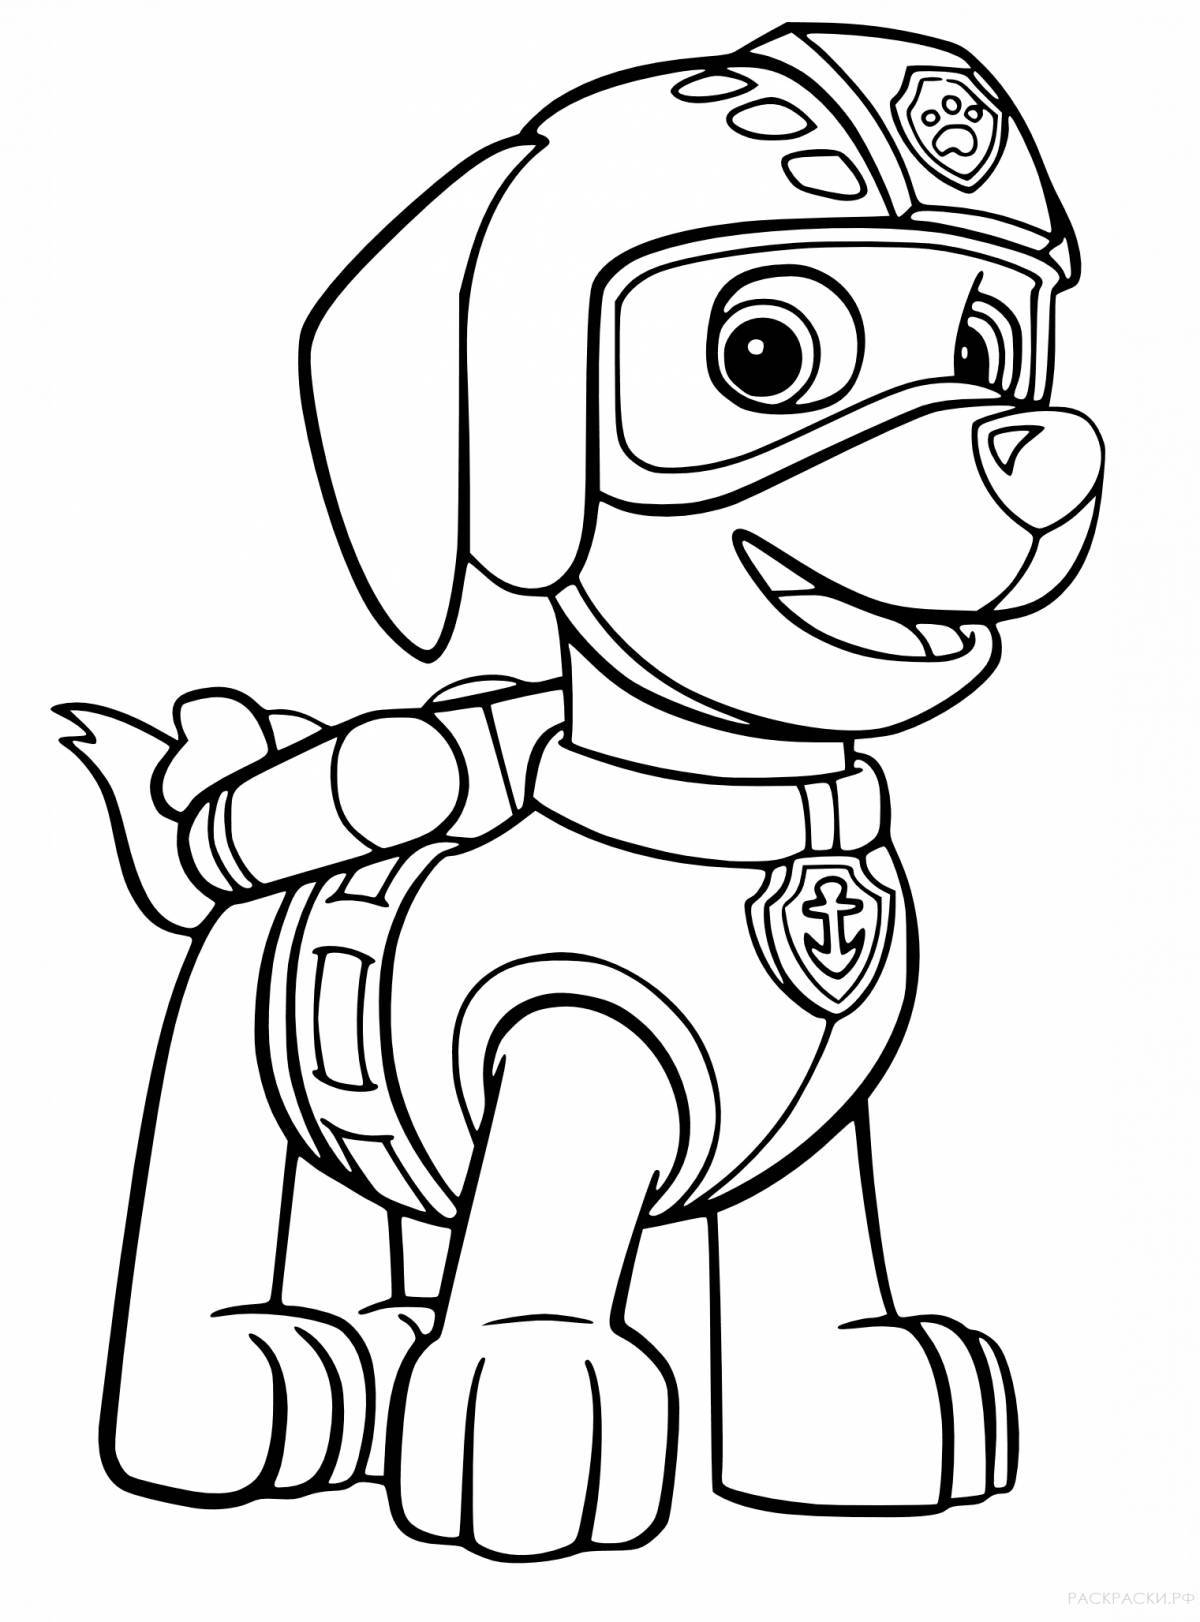 Rocky paw patrol smart coloring book